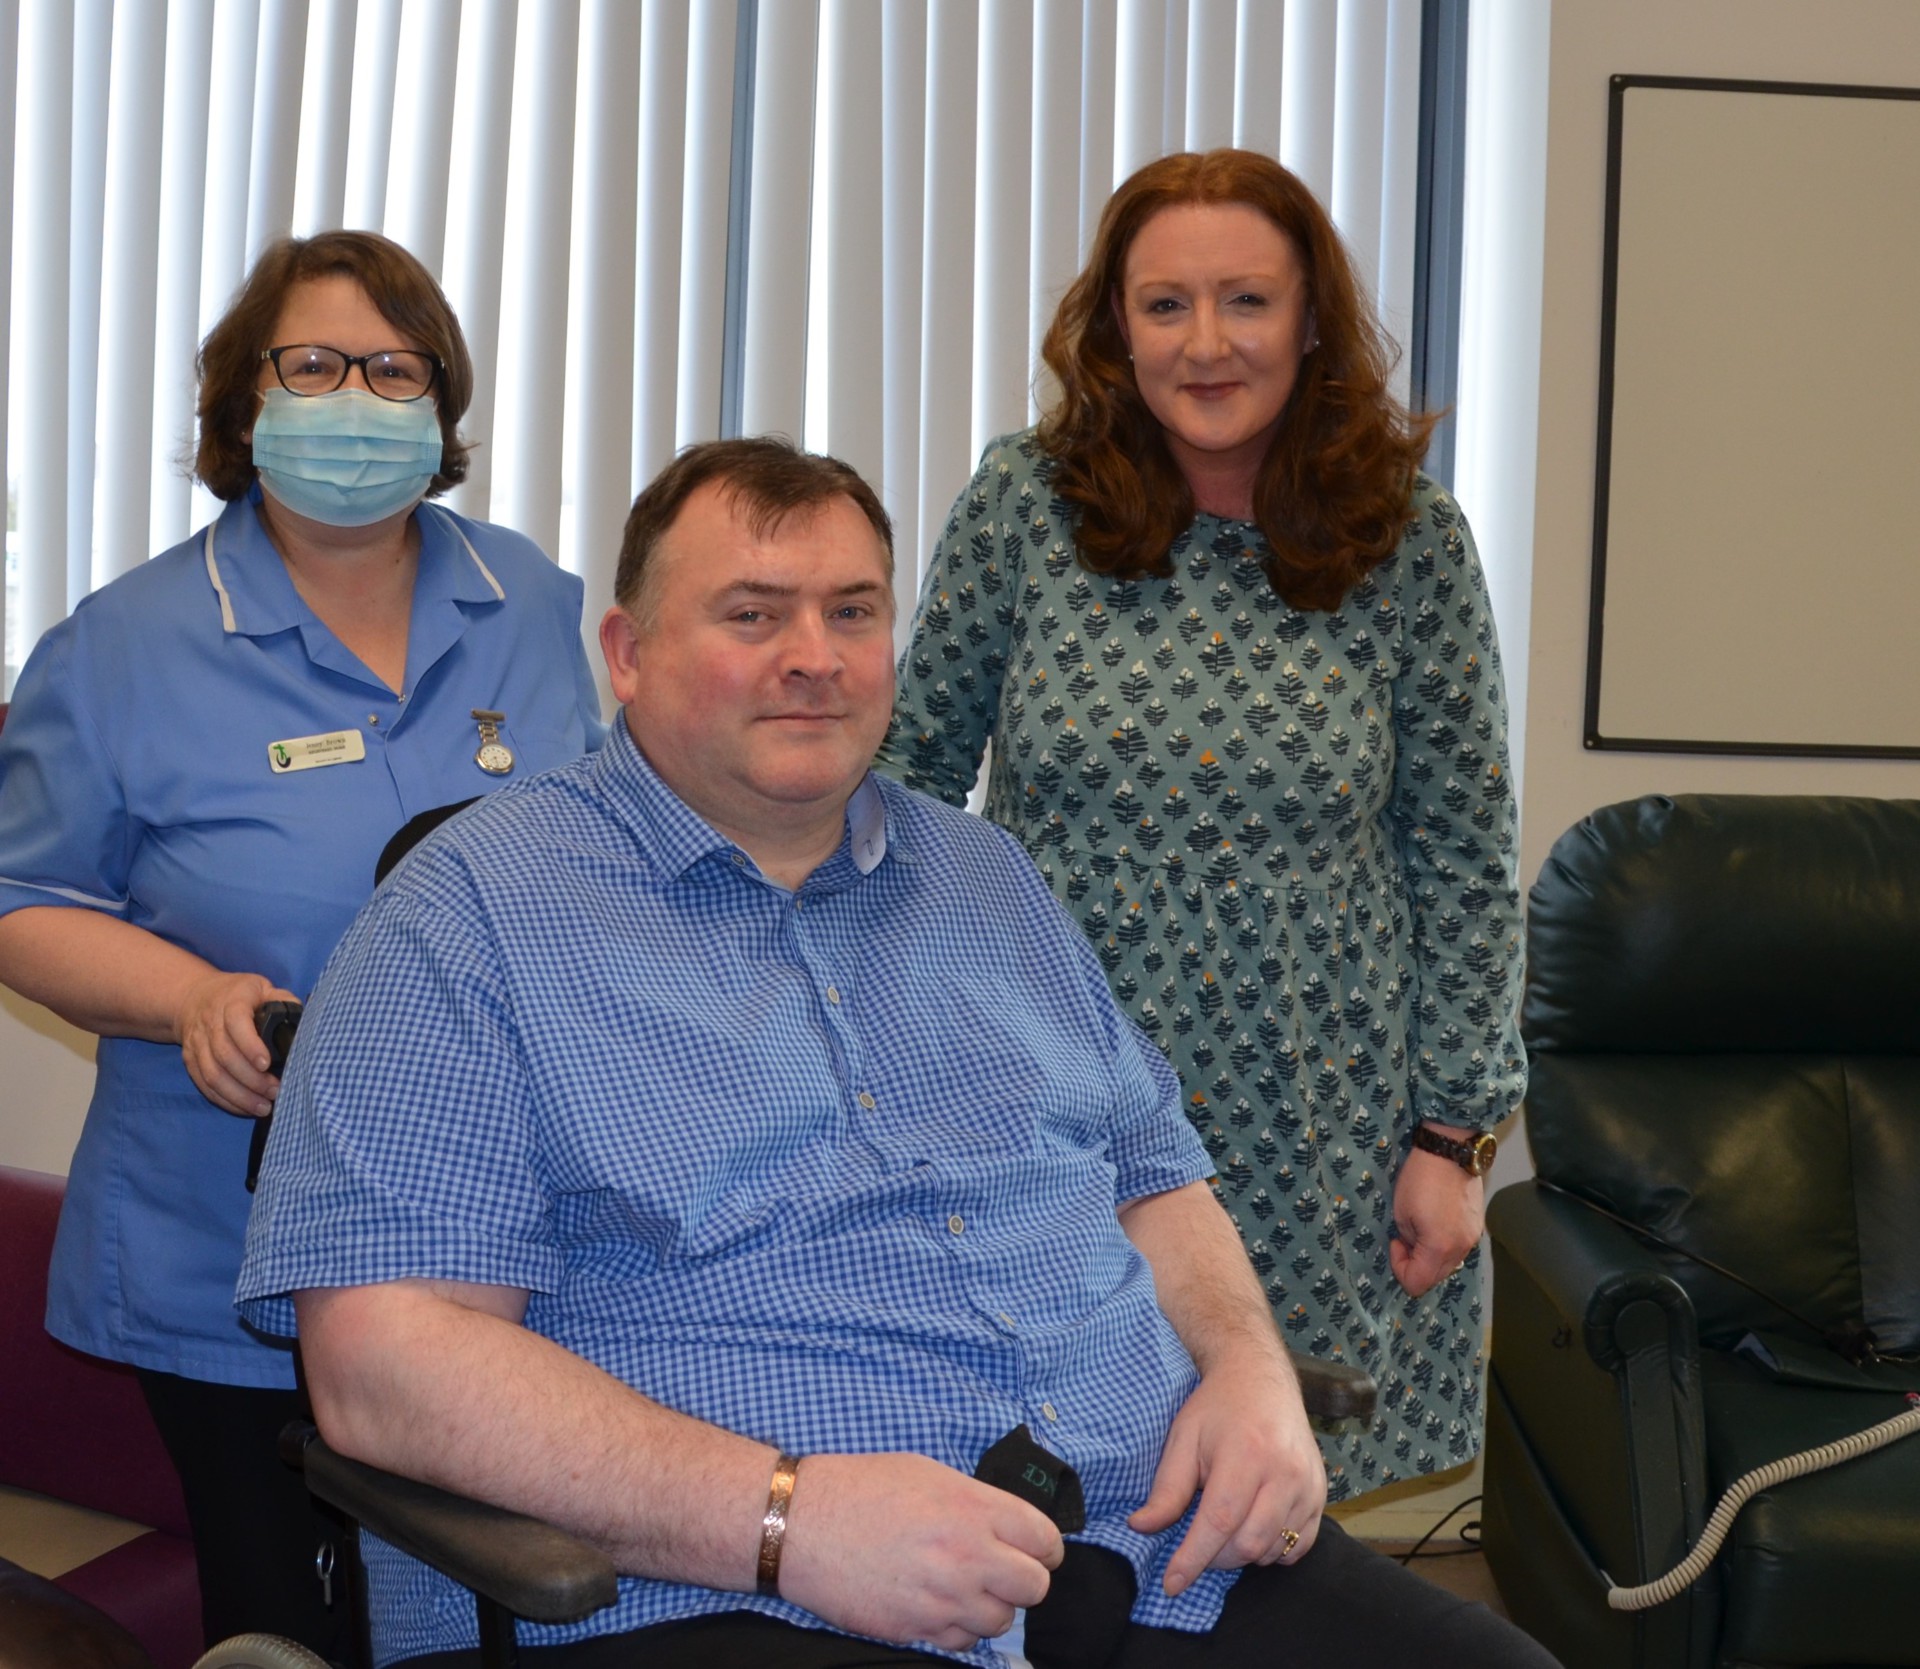 Dungannon couple hail ‘lifeline’ help from Hospice at time of need